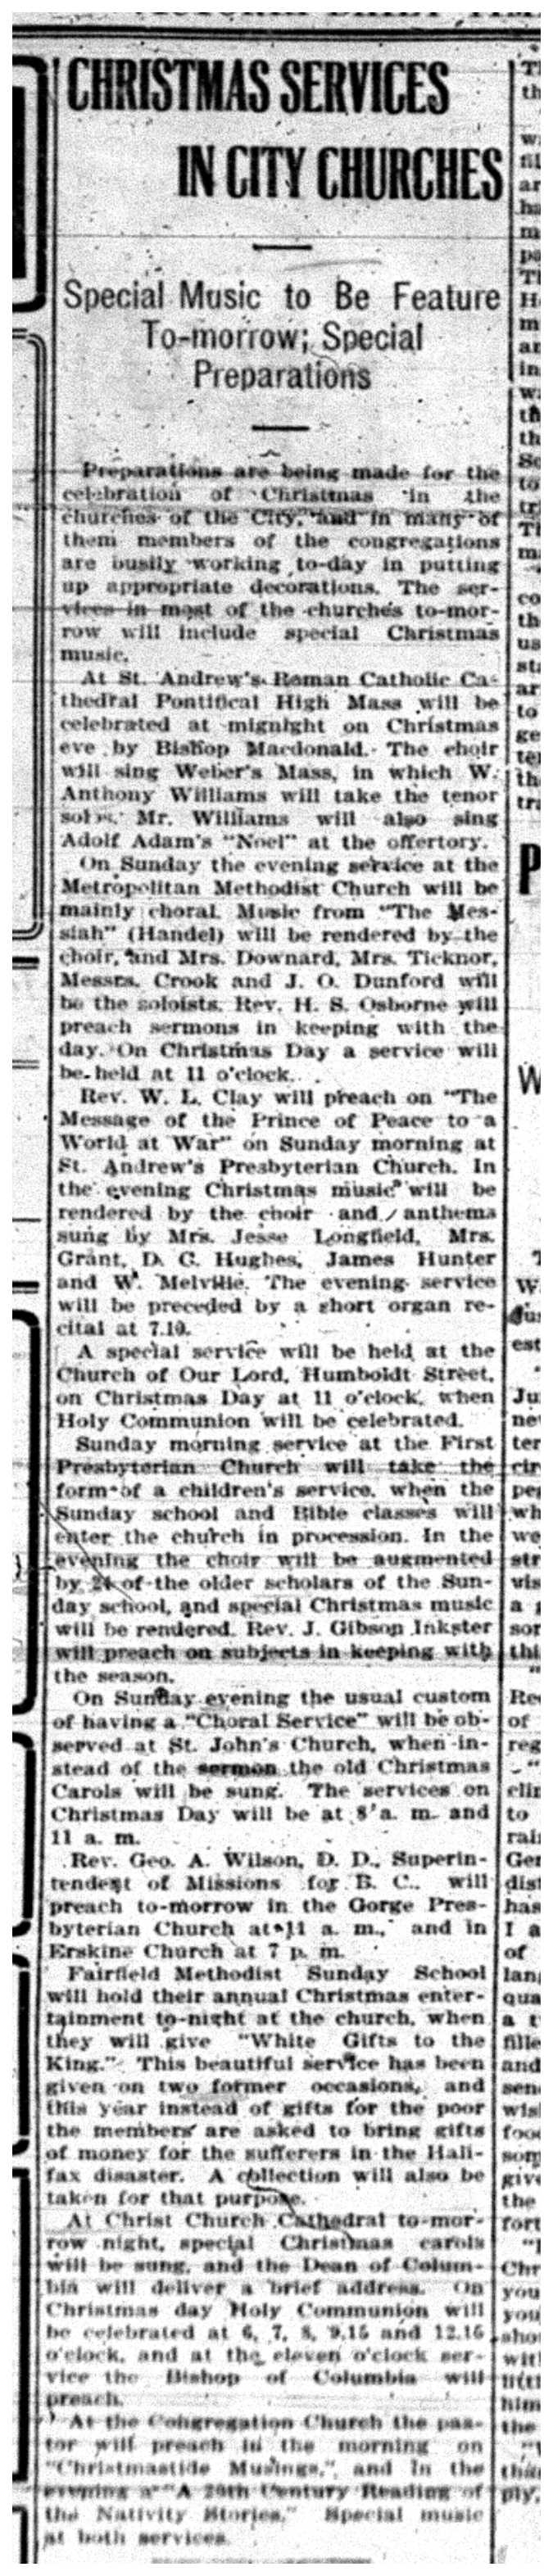 "Christmas Services in City Churches"